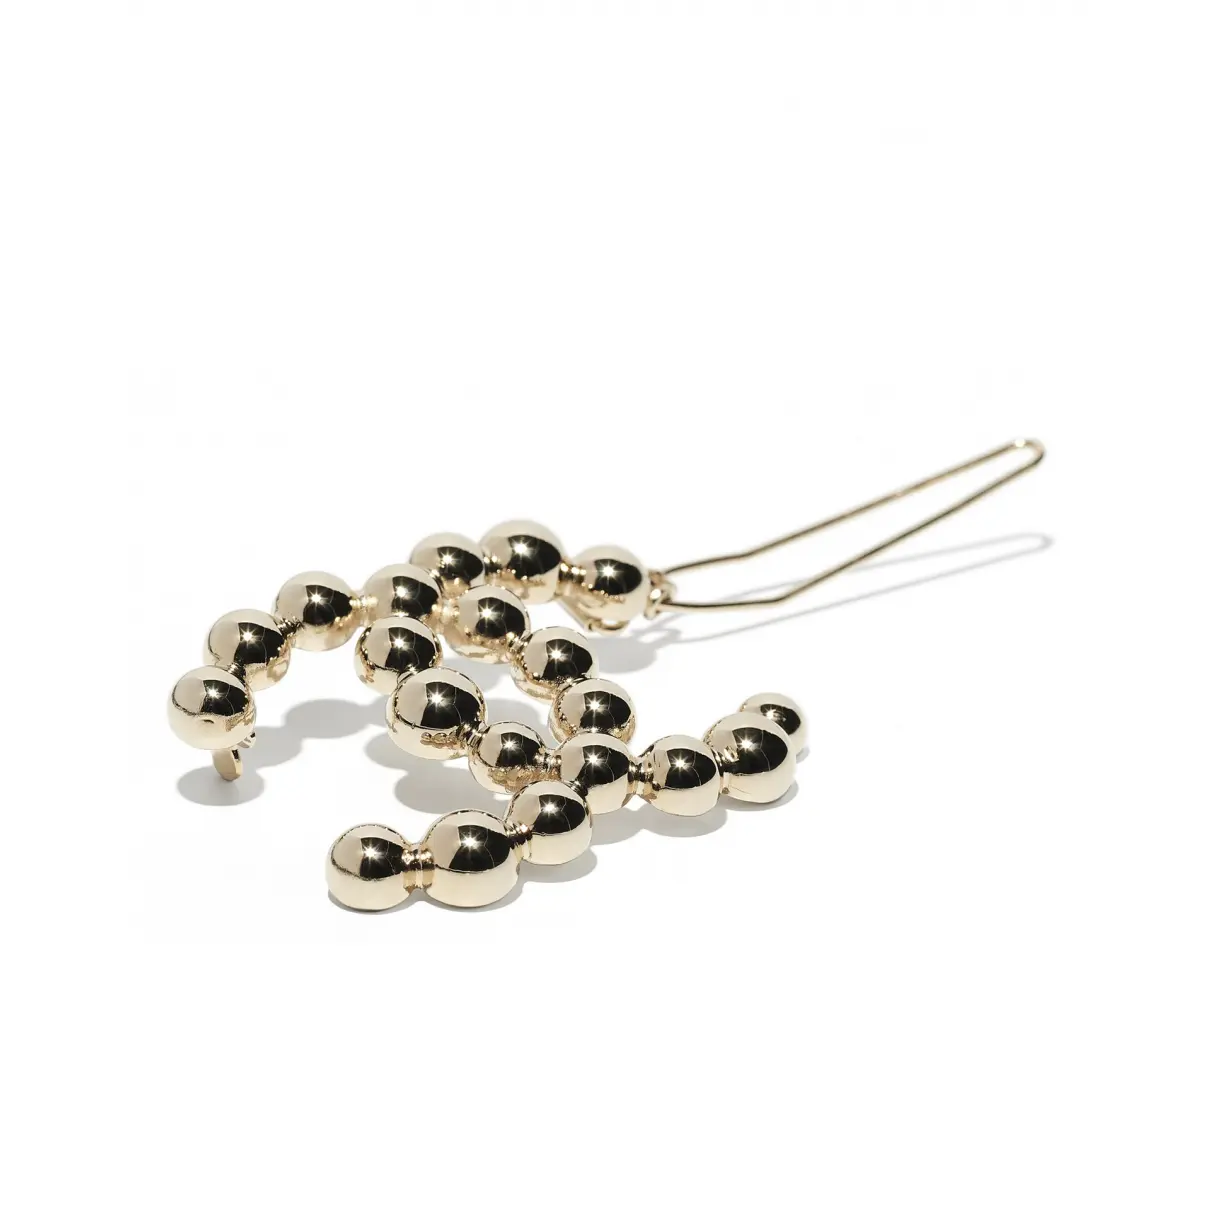 Buy Chanel CC hair accessory online